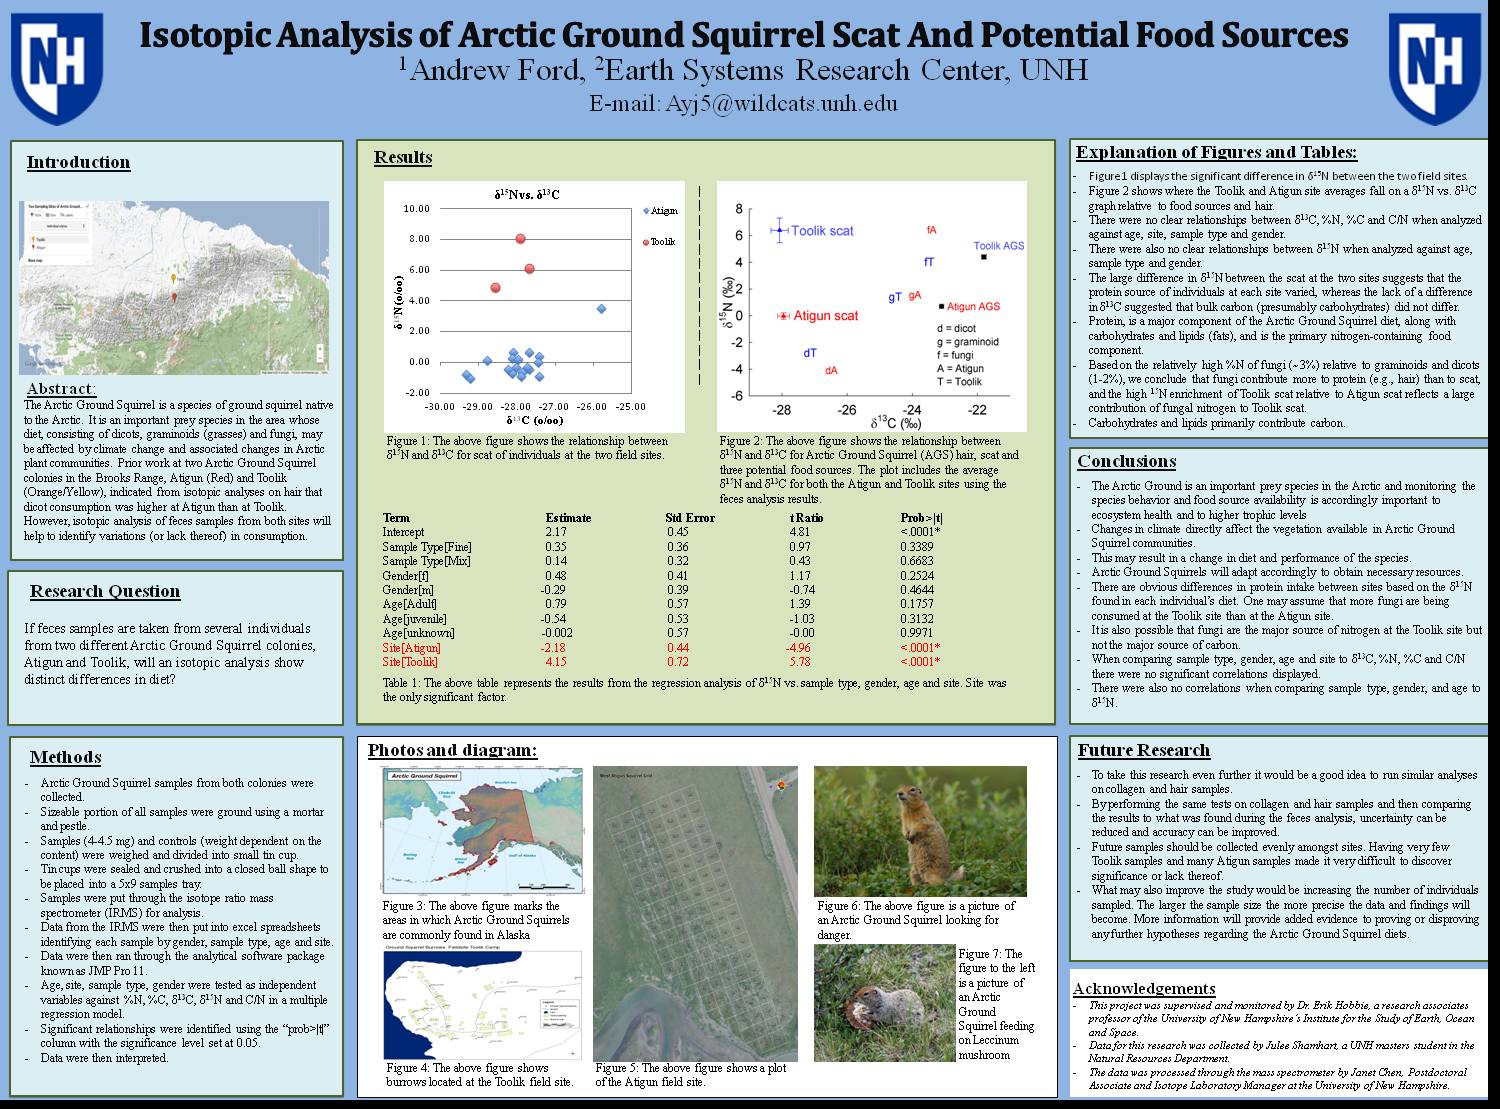 Isotopic Analysis Of Arctic Ground Squirrel Scat And Potential Food Sources by aford0404